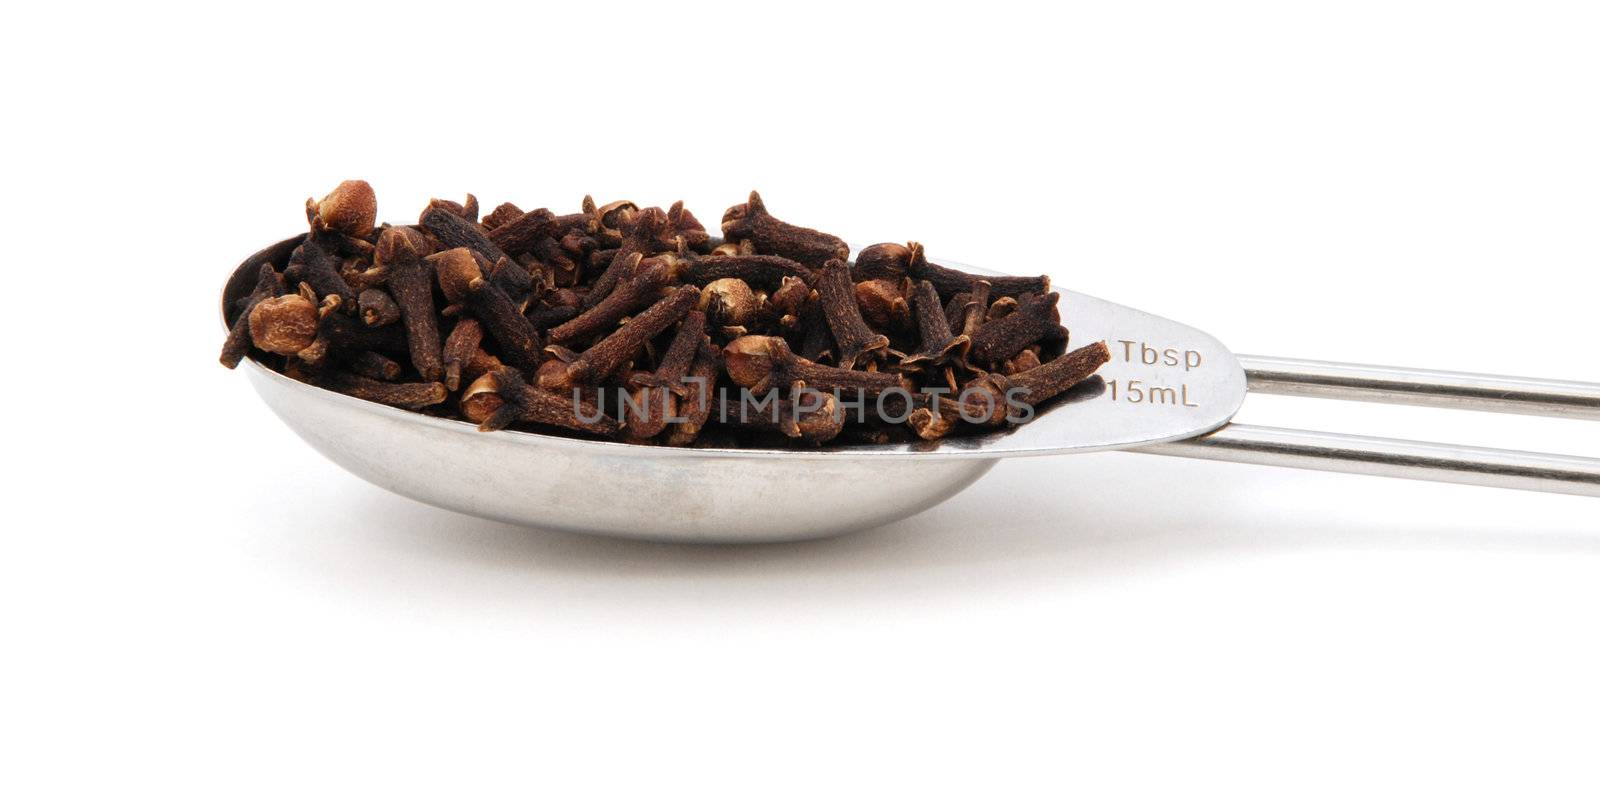 Whole cloves measured in a metal tablespoon, isolated on a white background